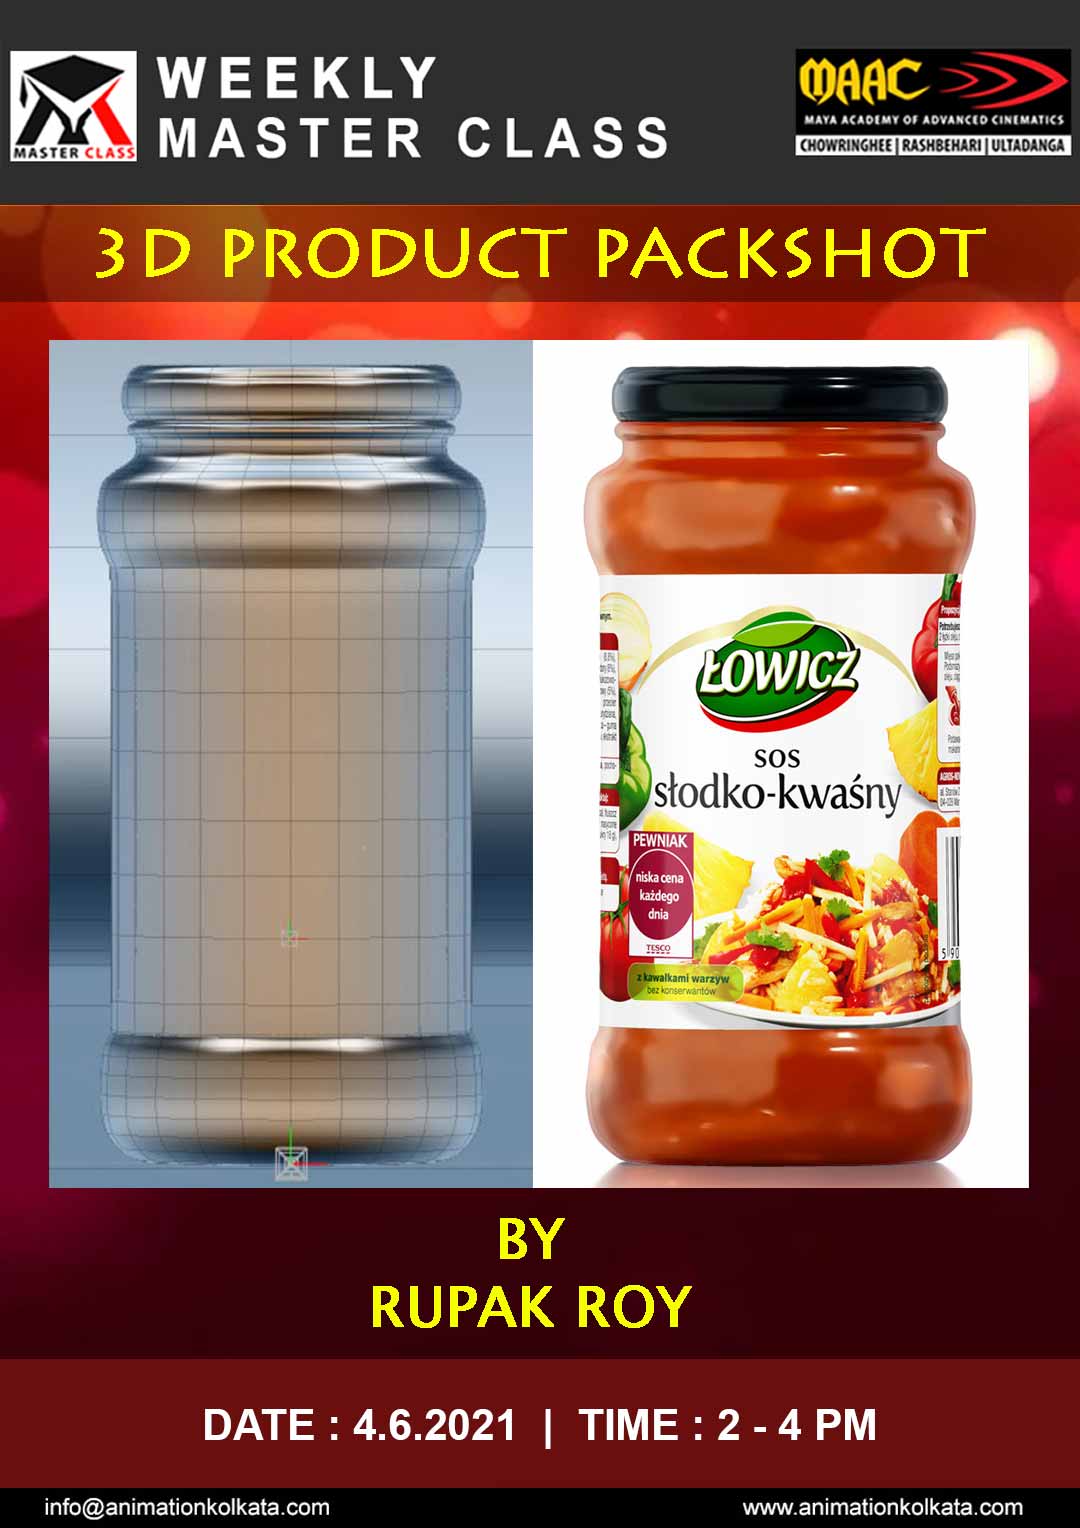 Weekly Master Class on 3D Product Packshot